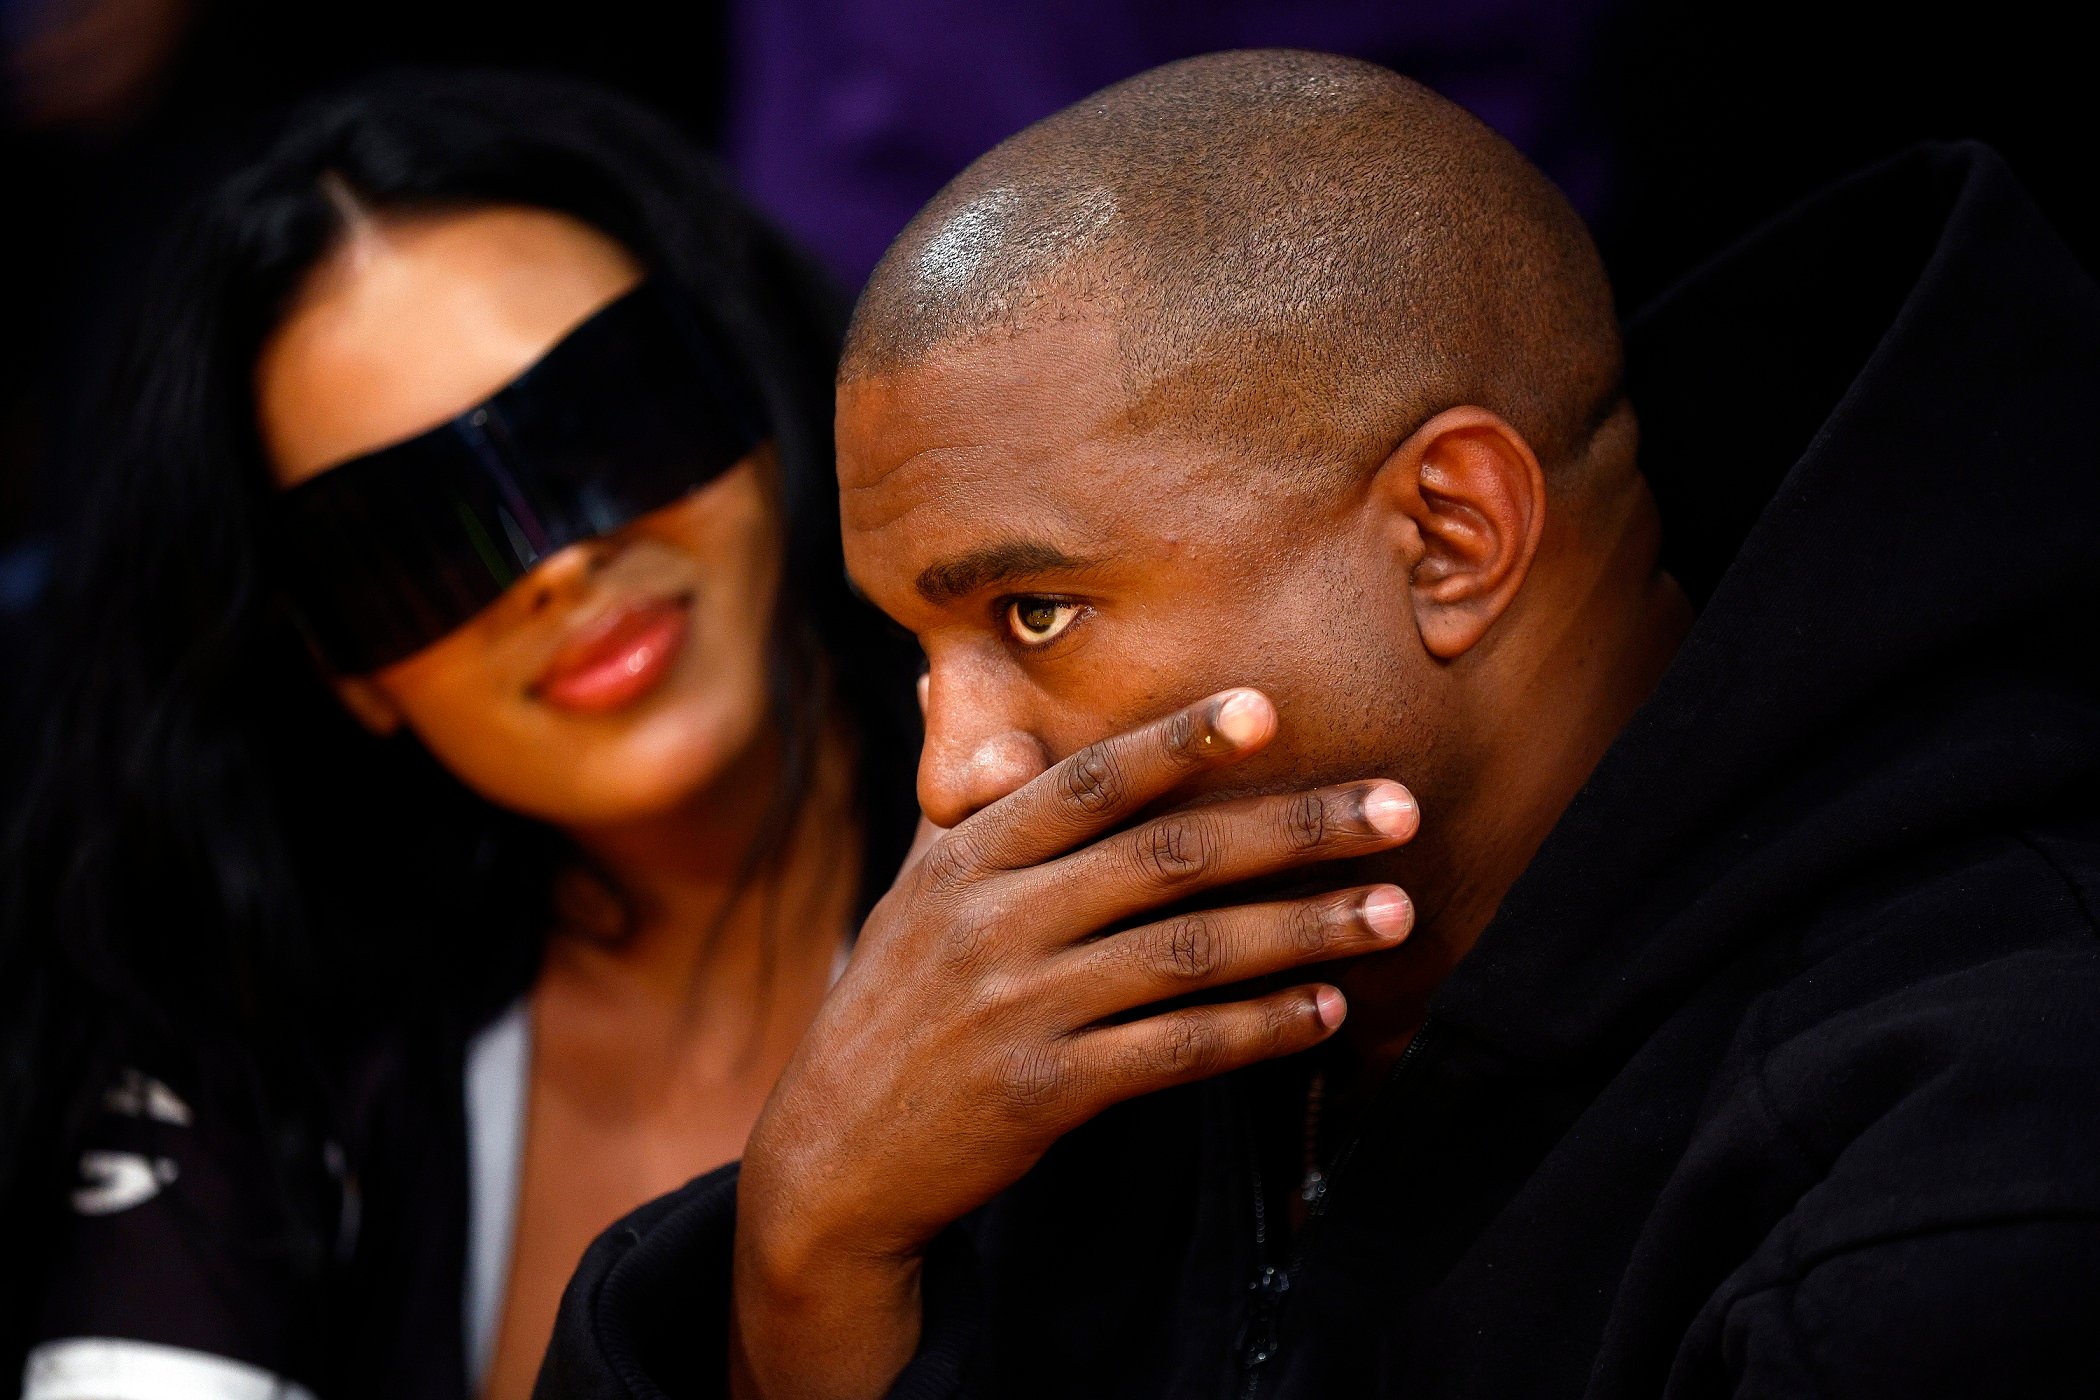 Billionaire Kanye West deep in thought at the Lakers Wizards game